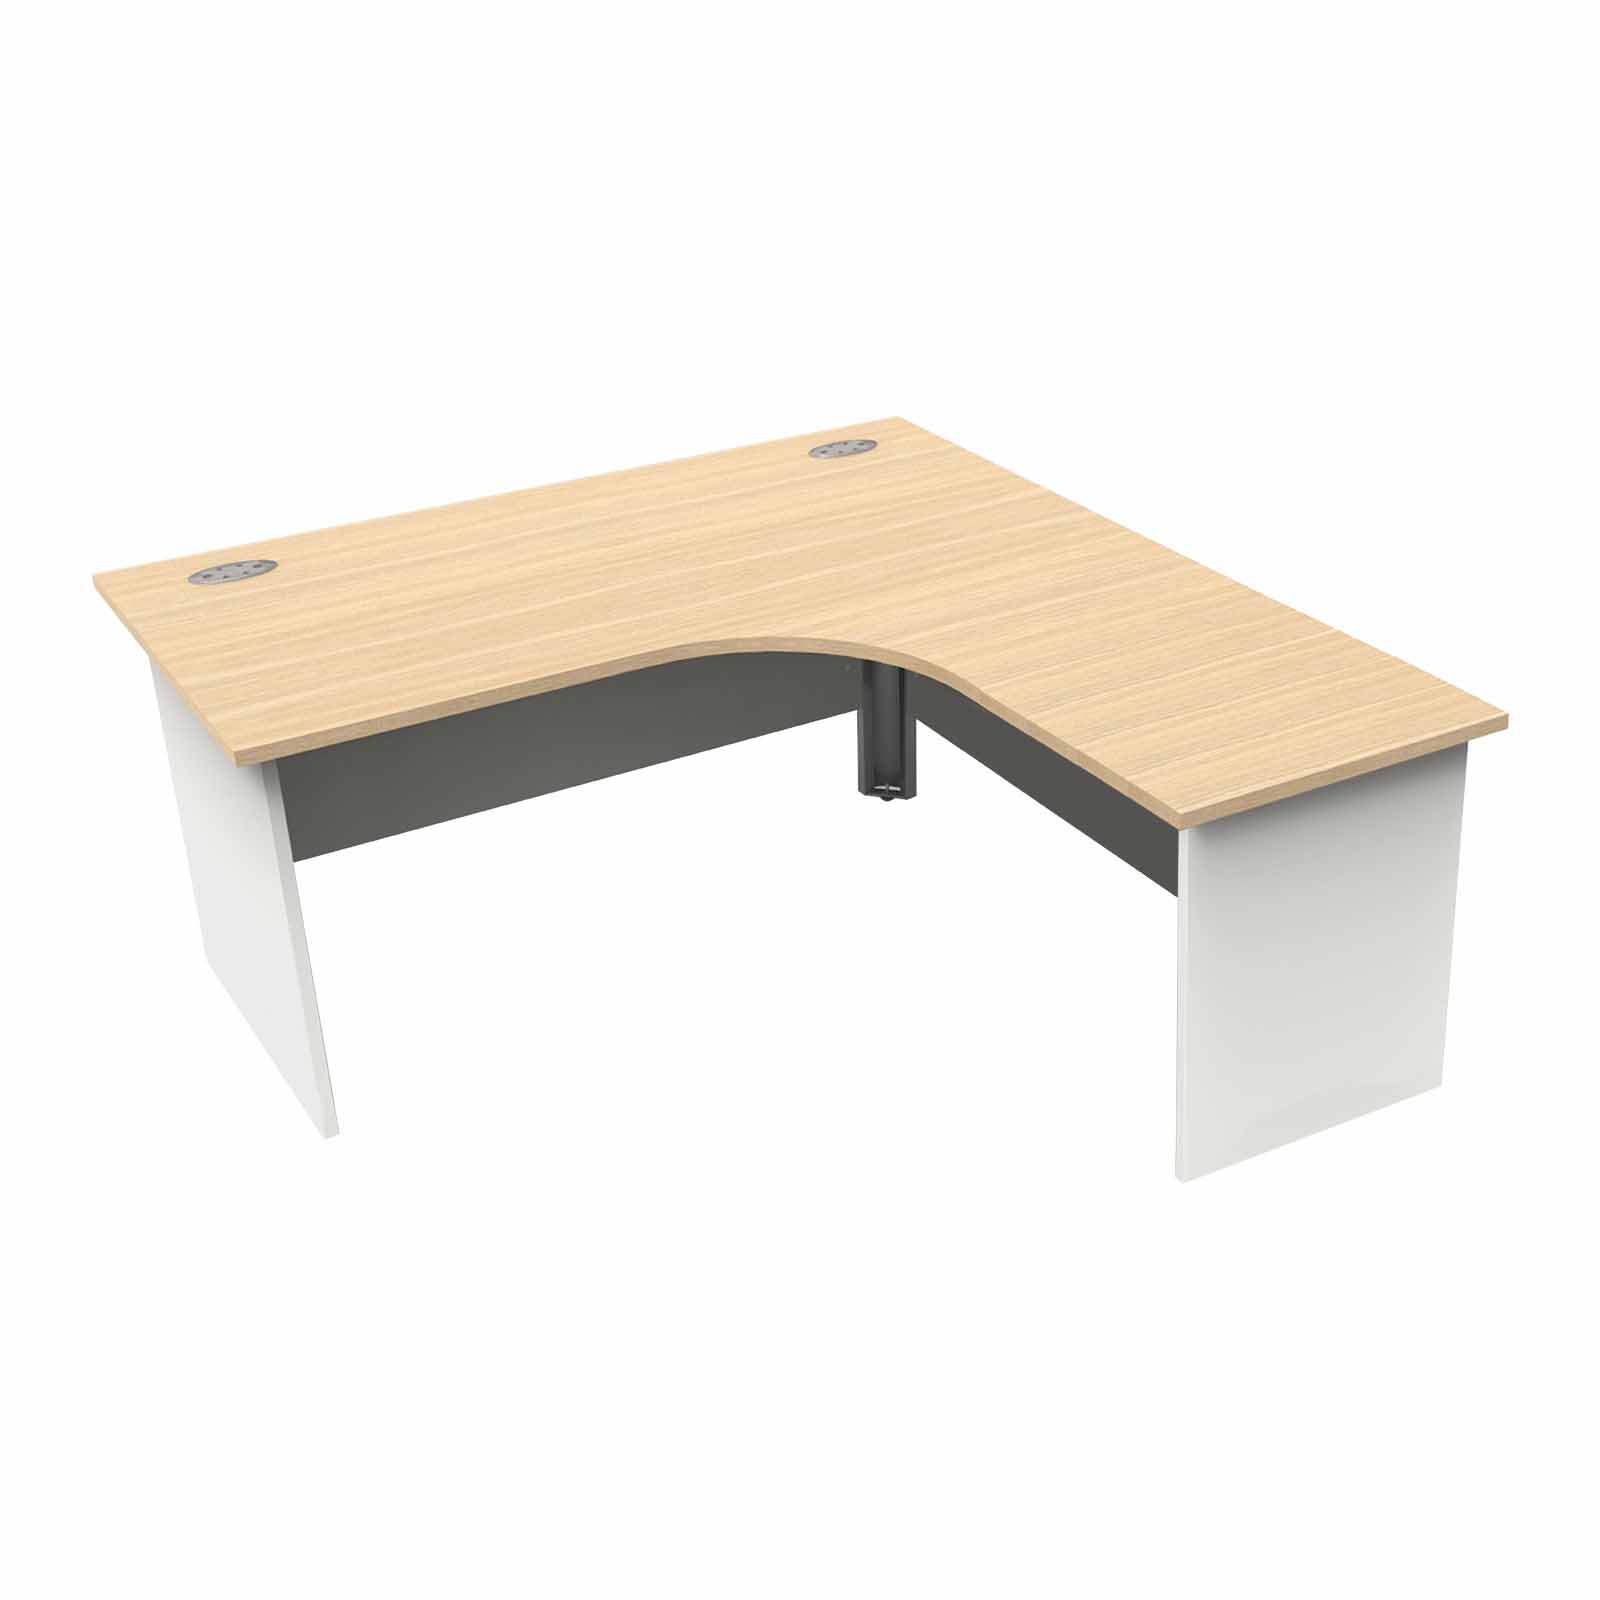 MADE TO ORDER Curved panel end desk